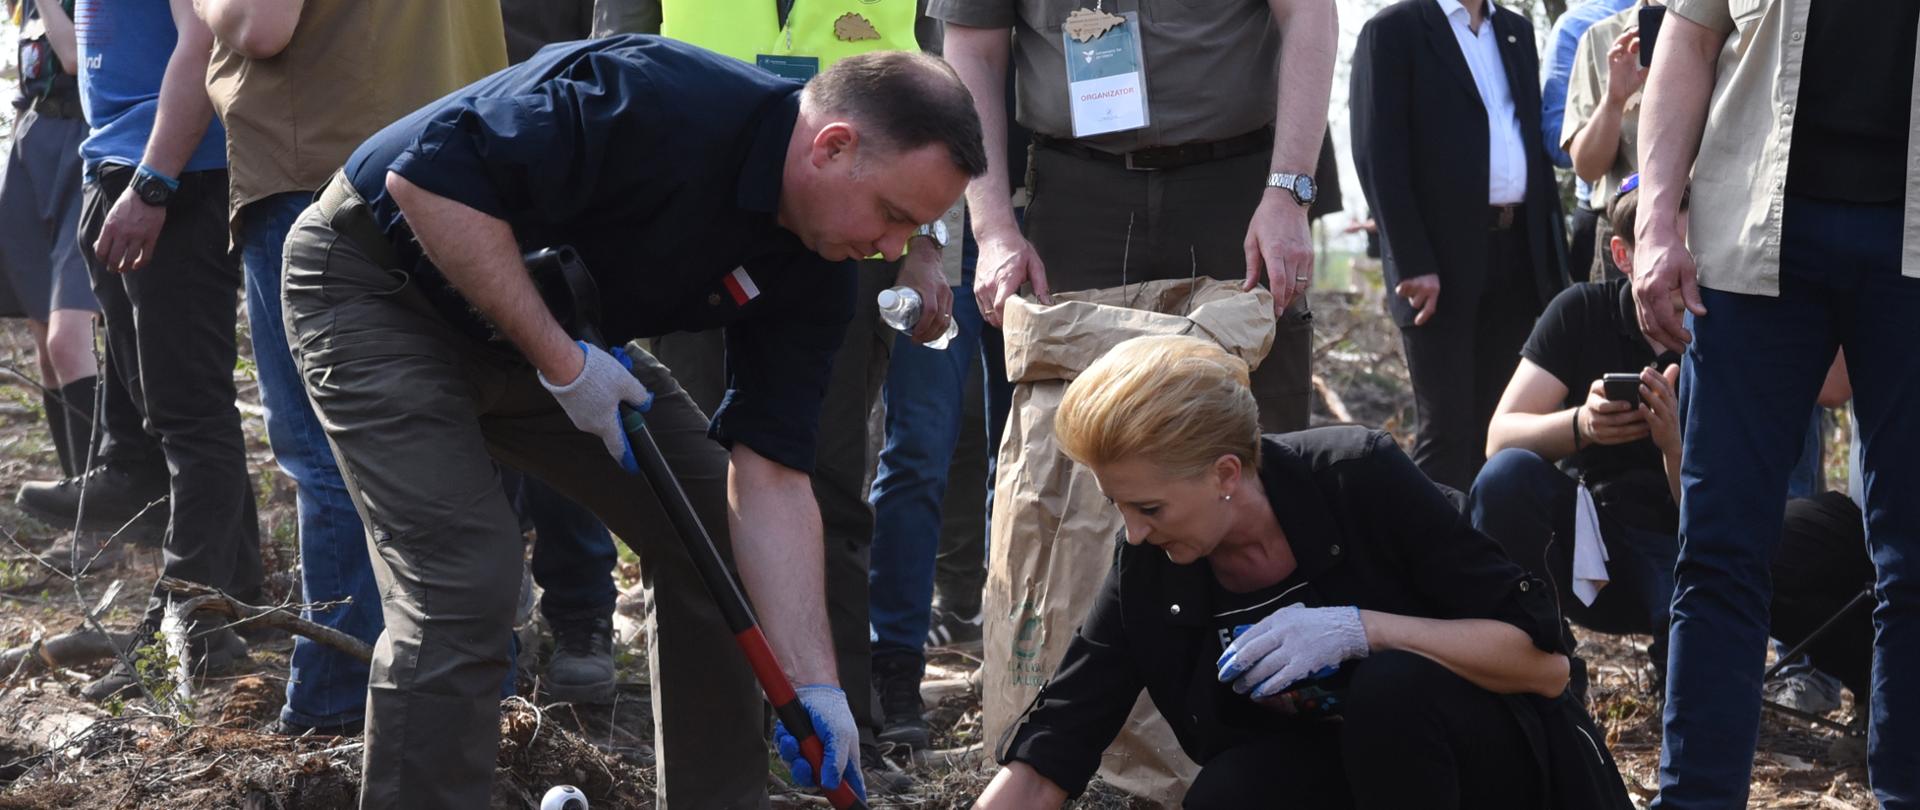 The President of the Republic of Poland Andrzej Duda and First Lady Agata Kornhauser-Duda planting a tree